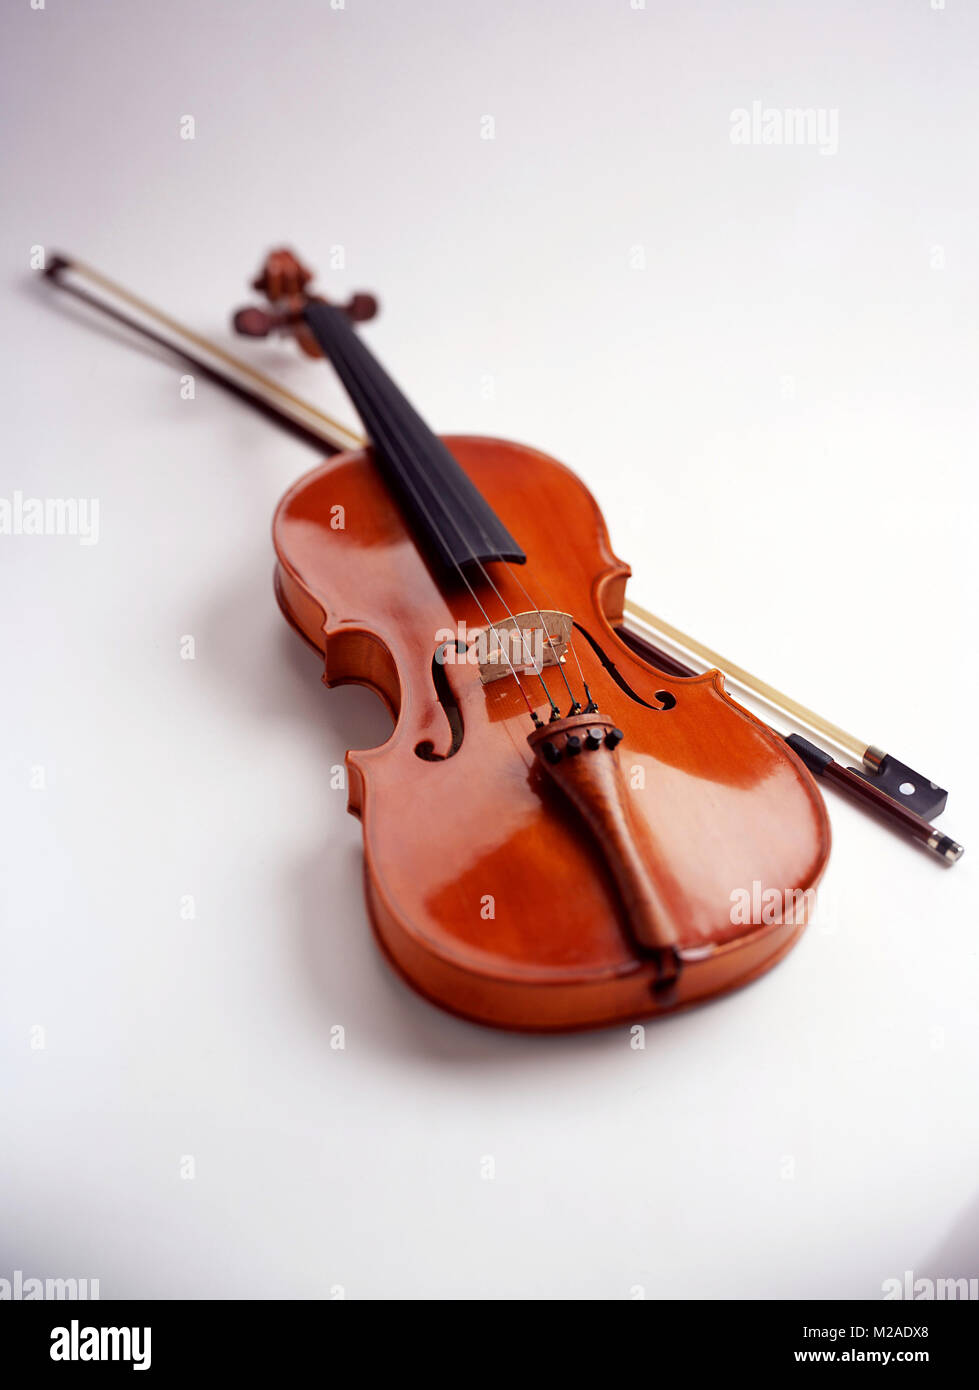 Violin on white background for cut out Stock Photo